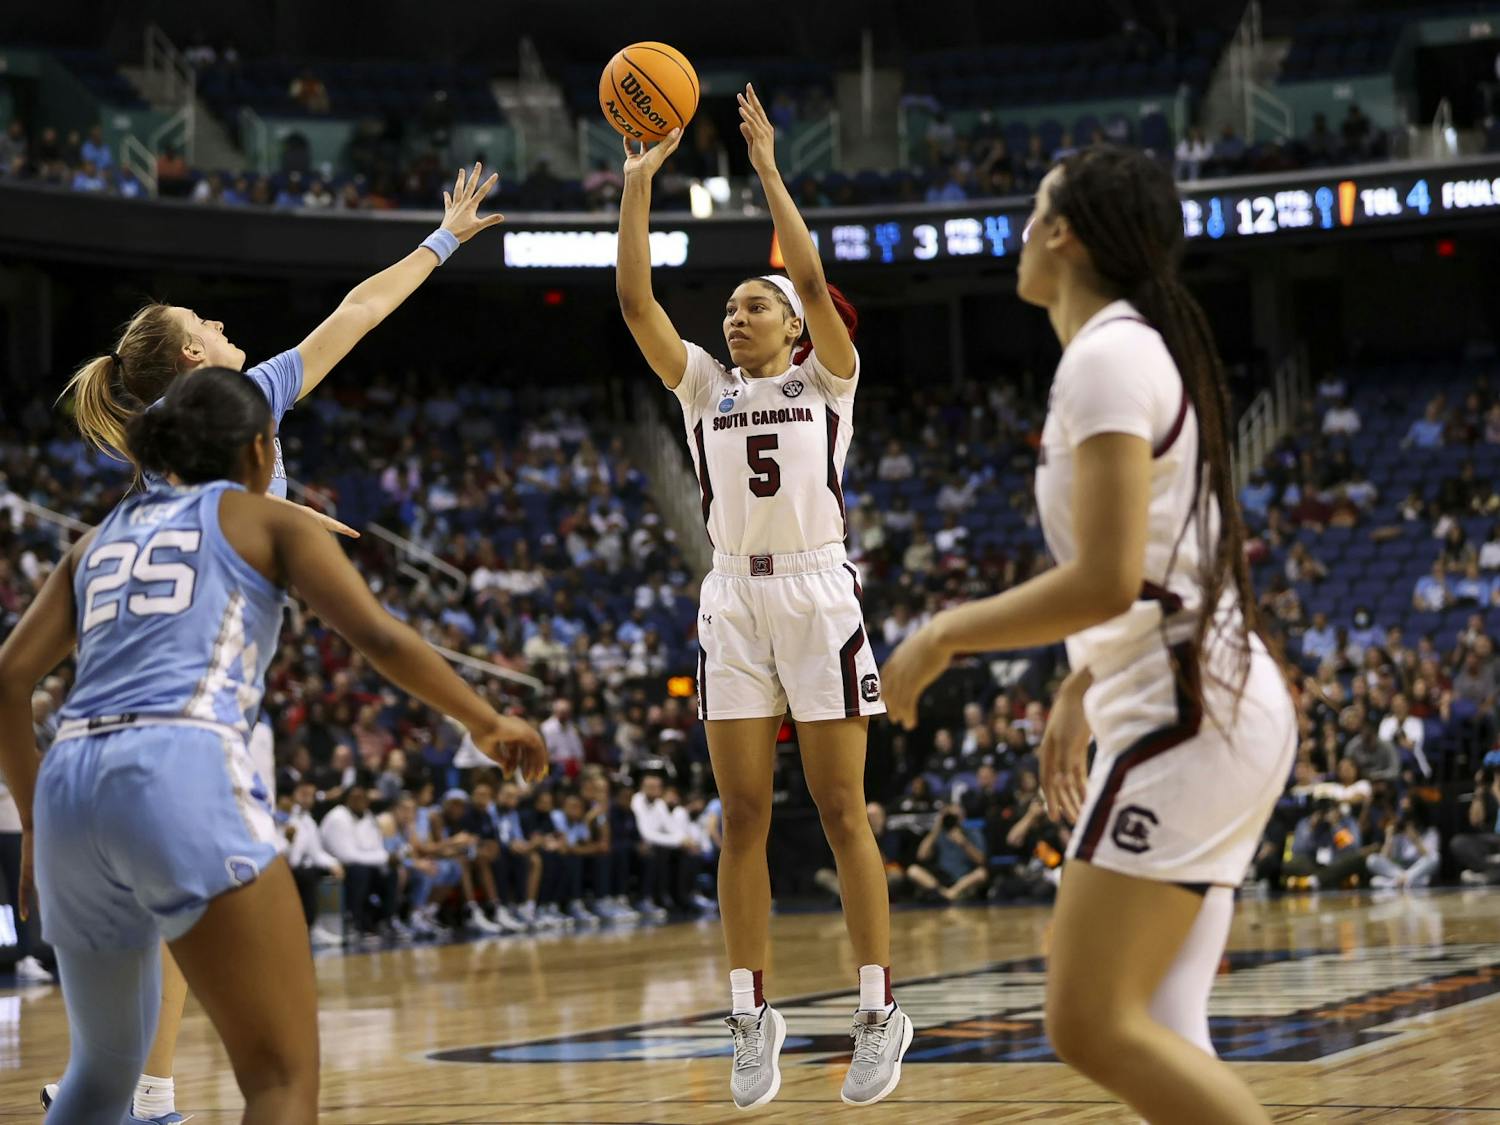 Senior forward Victoria Saxton shoots a two-point shot in the third quarter of South Carolina's 69-61 victory over North Carolina in the Sweet Sixteen on March 25, 2022.